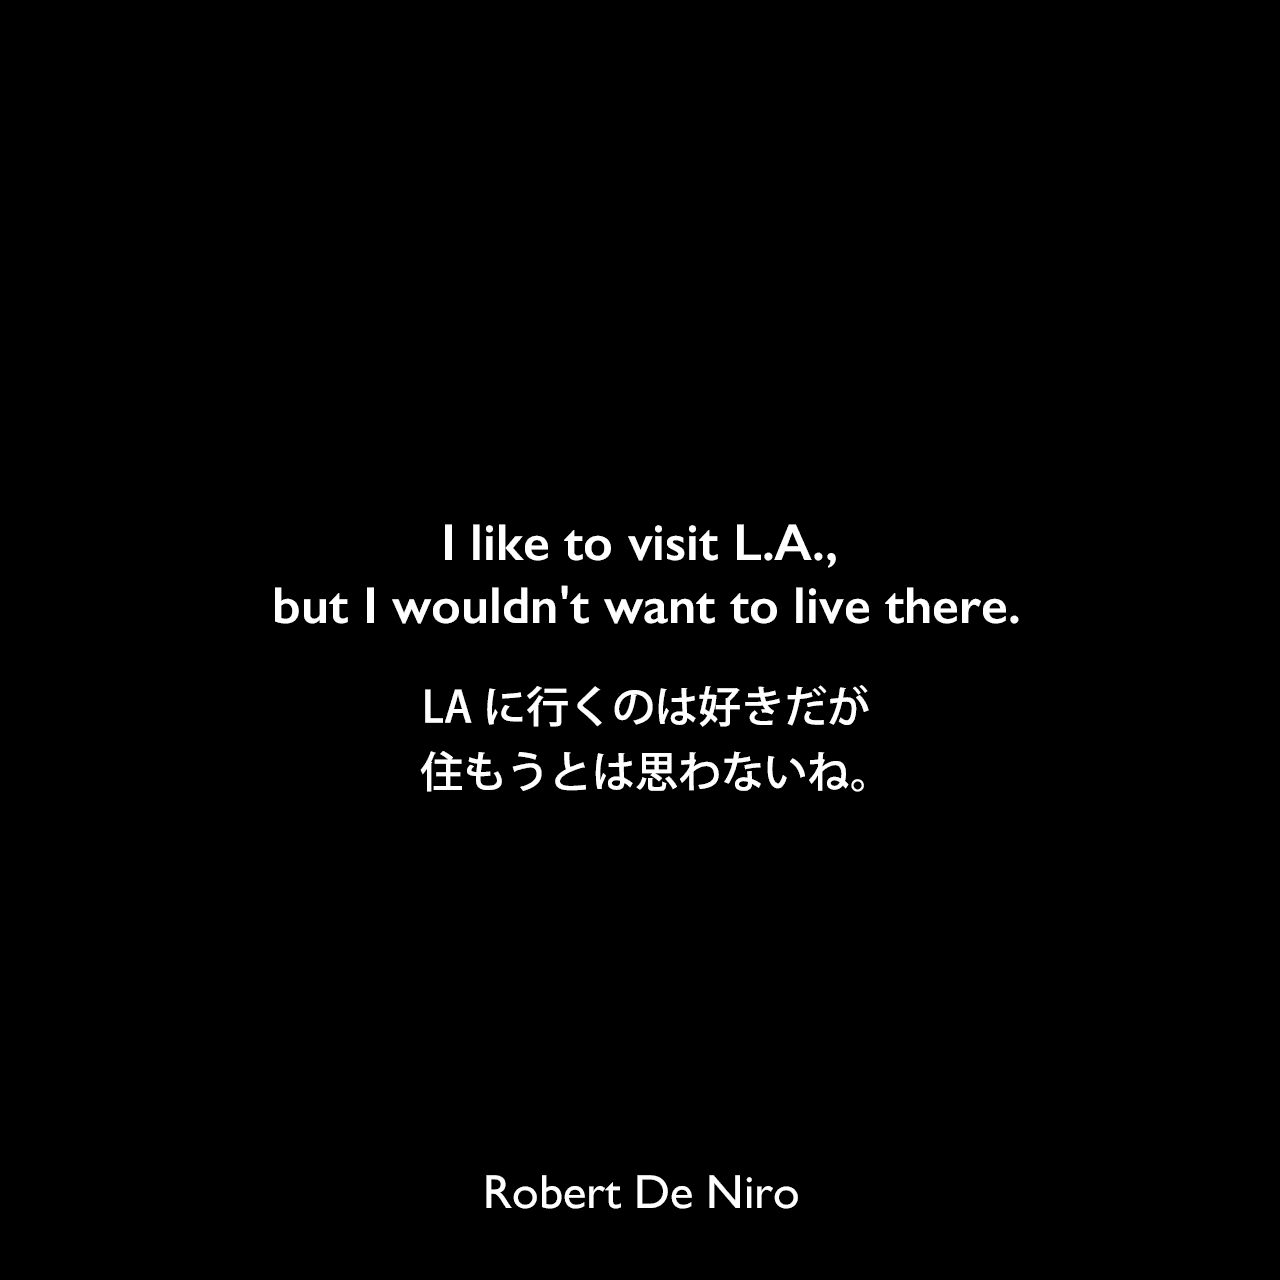 I like to visit L.A., but I wouldn't want to live there.LAに行くのは好きだが、住もうとは思わないね。Robert De Niro